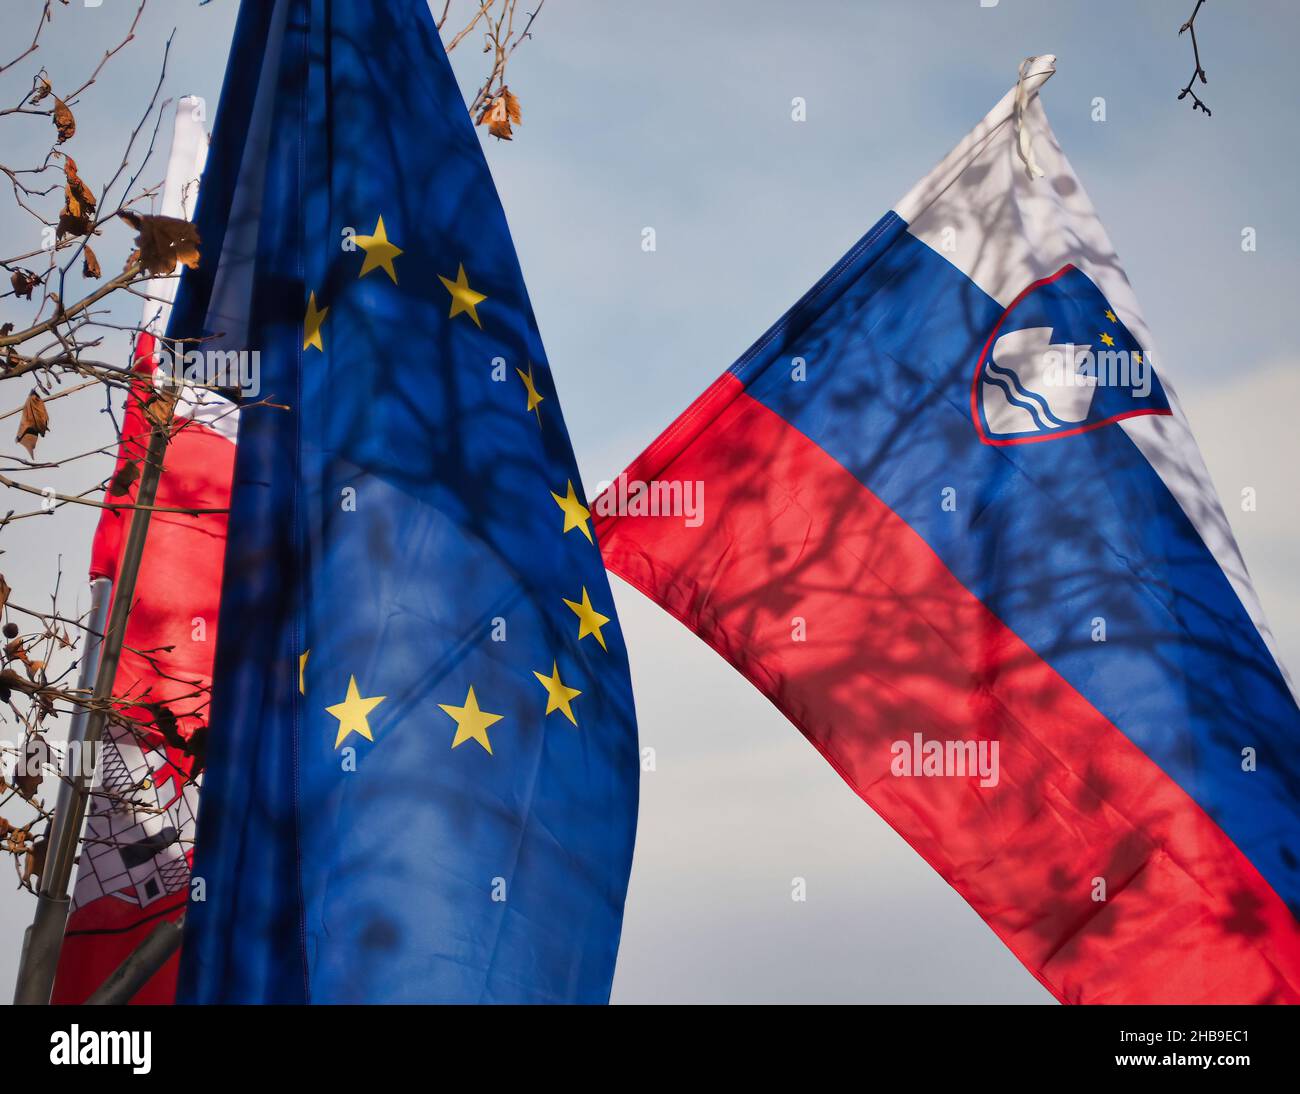 EU flag and the flag of Slovenia in the air Stock Photo